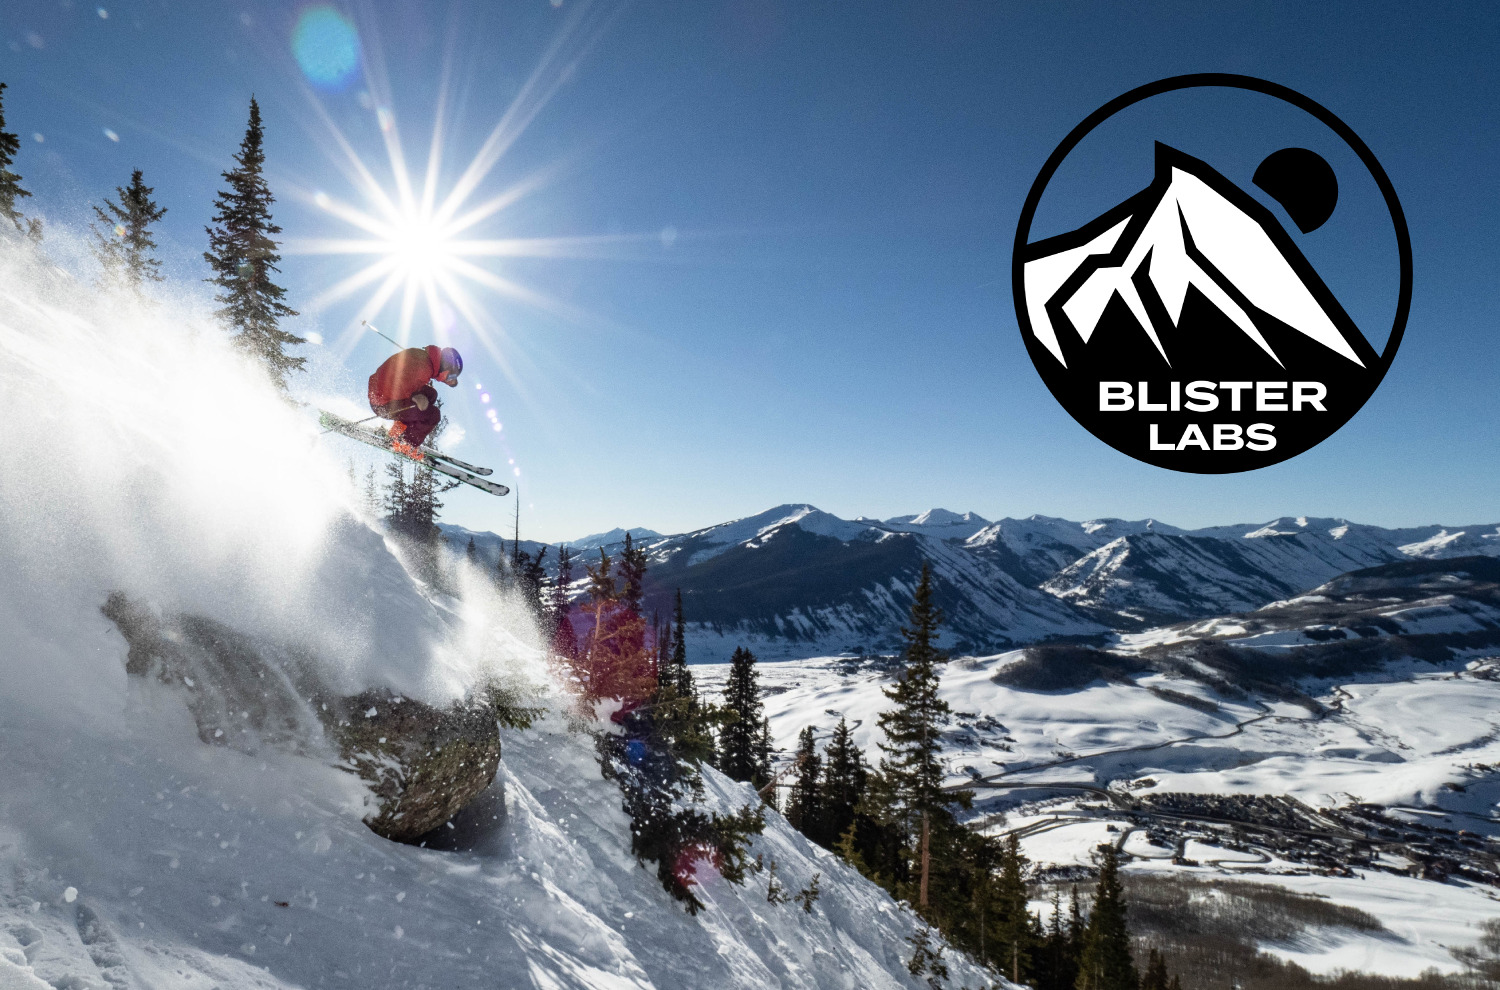 Blister Labs is a new partnership between BLISTER, the University of Colorado at Boulder’s School of Engineering, and the brand-new, state-of-the-art engineering facility at Western Colorado University in Gunnison, Colorado.